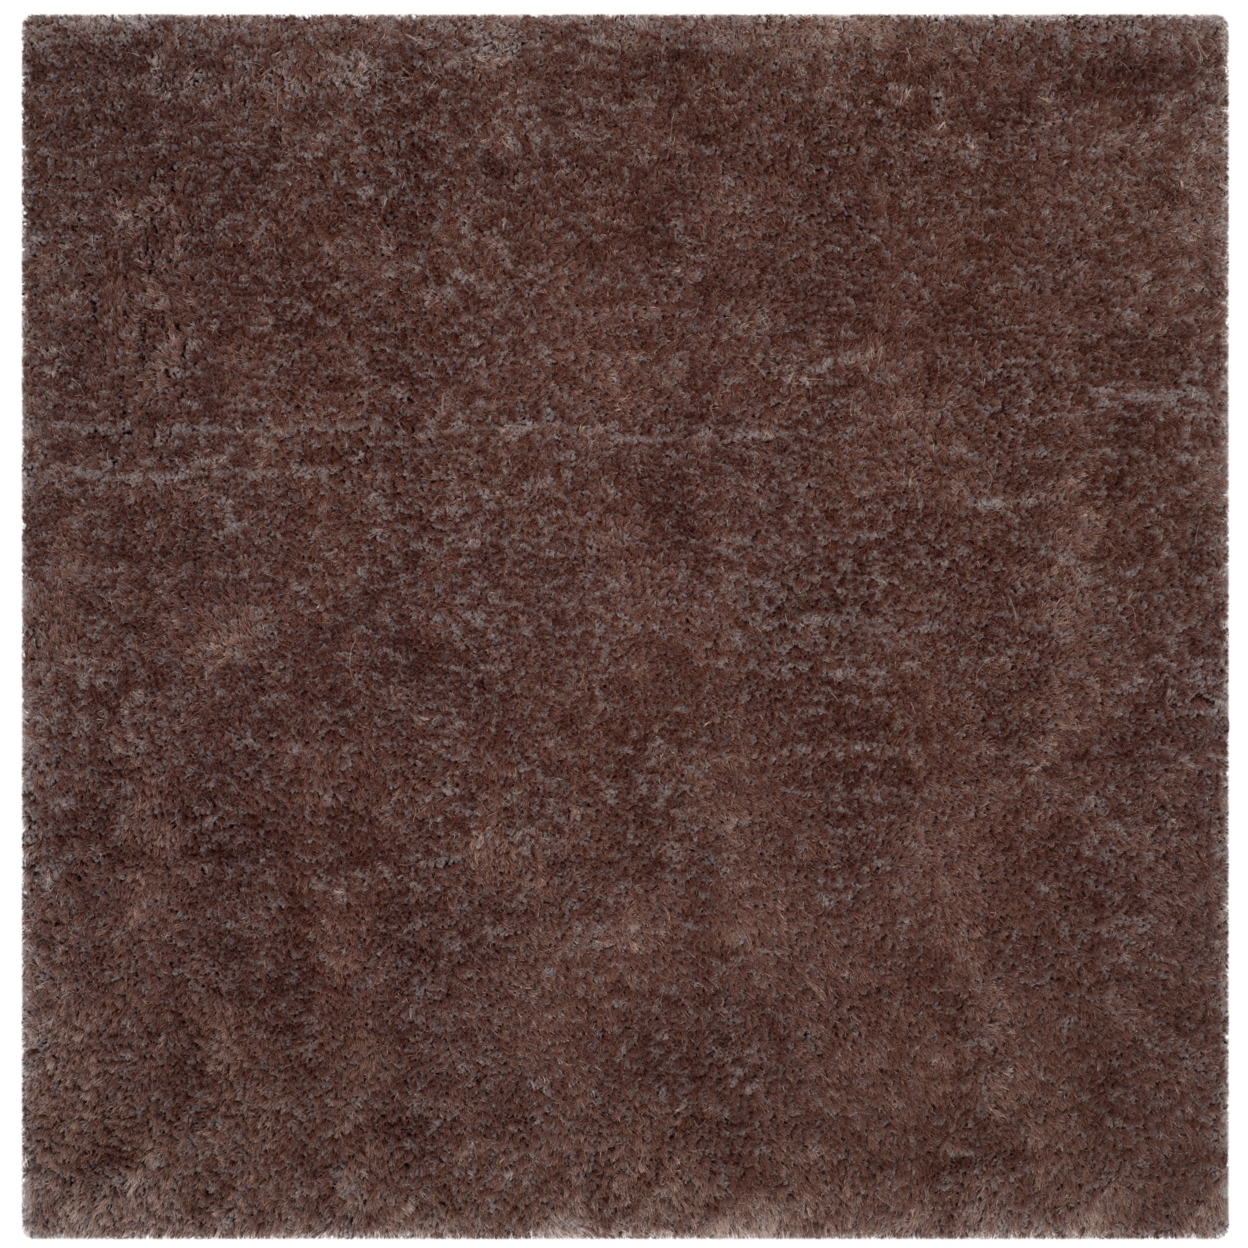 SAFAVIEH Luxe Shag Collection SGX160D Handmade Brown Rug - 6' Square